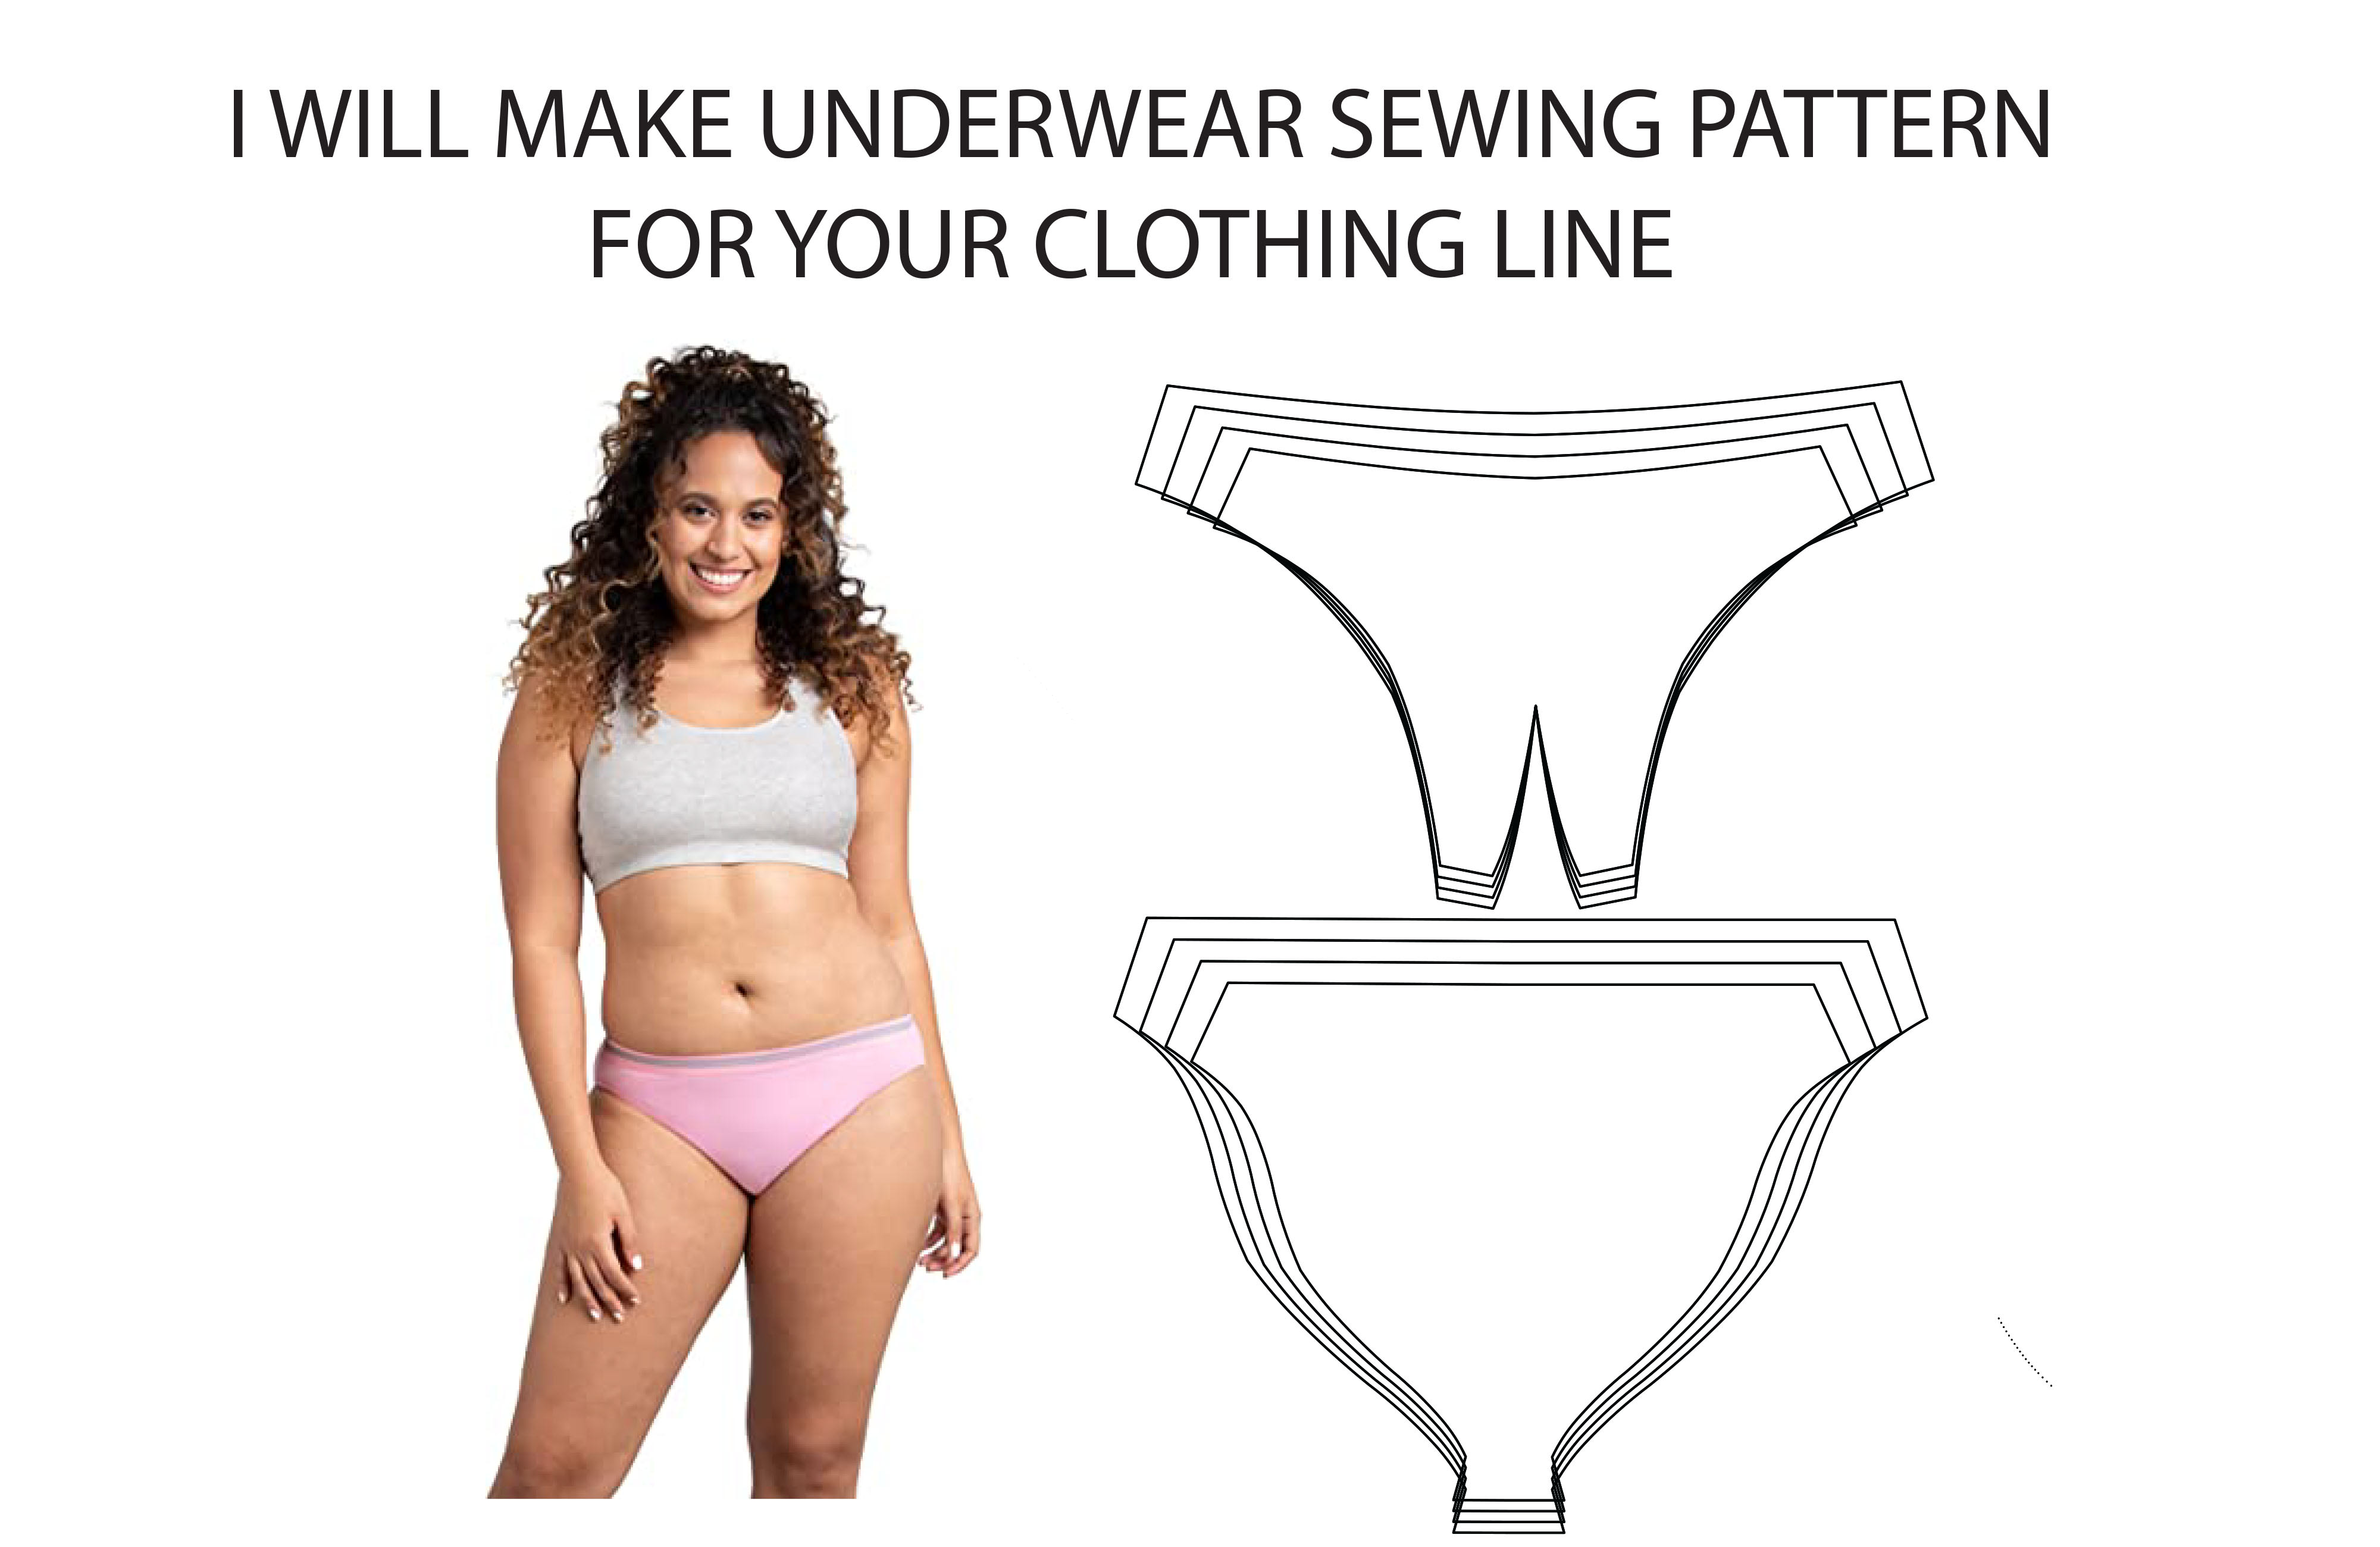 Make underwear sewing pattern for your clothing line by Pattern_maker01